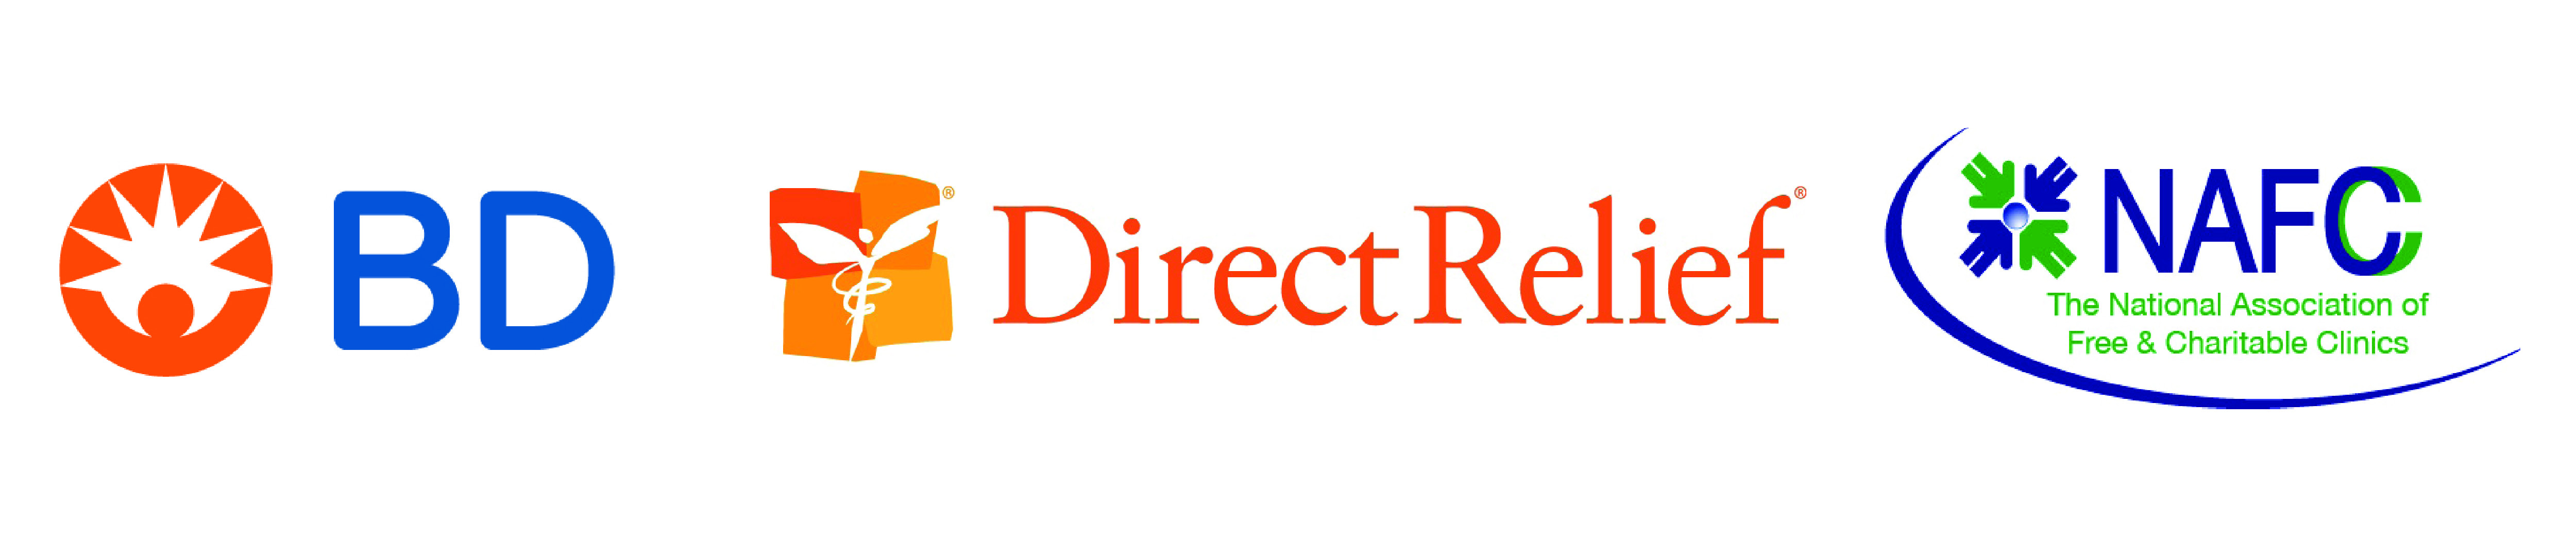 Direct Relief, BD an